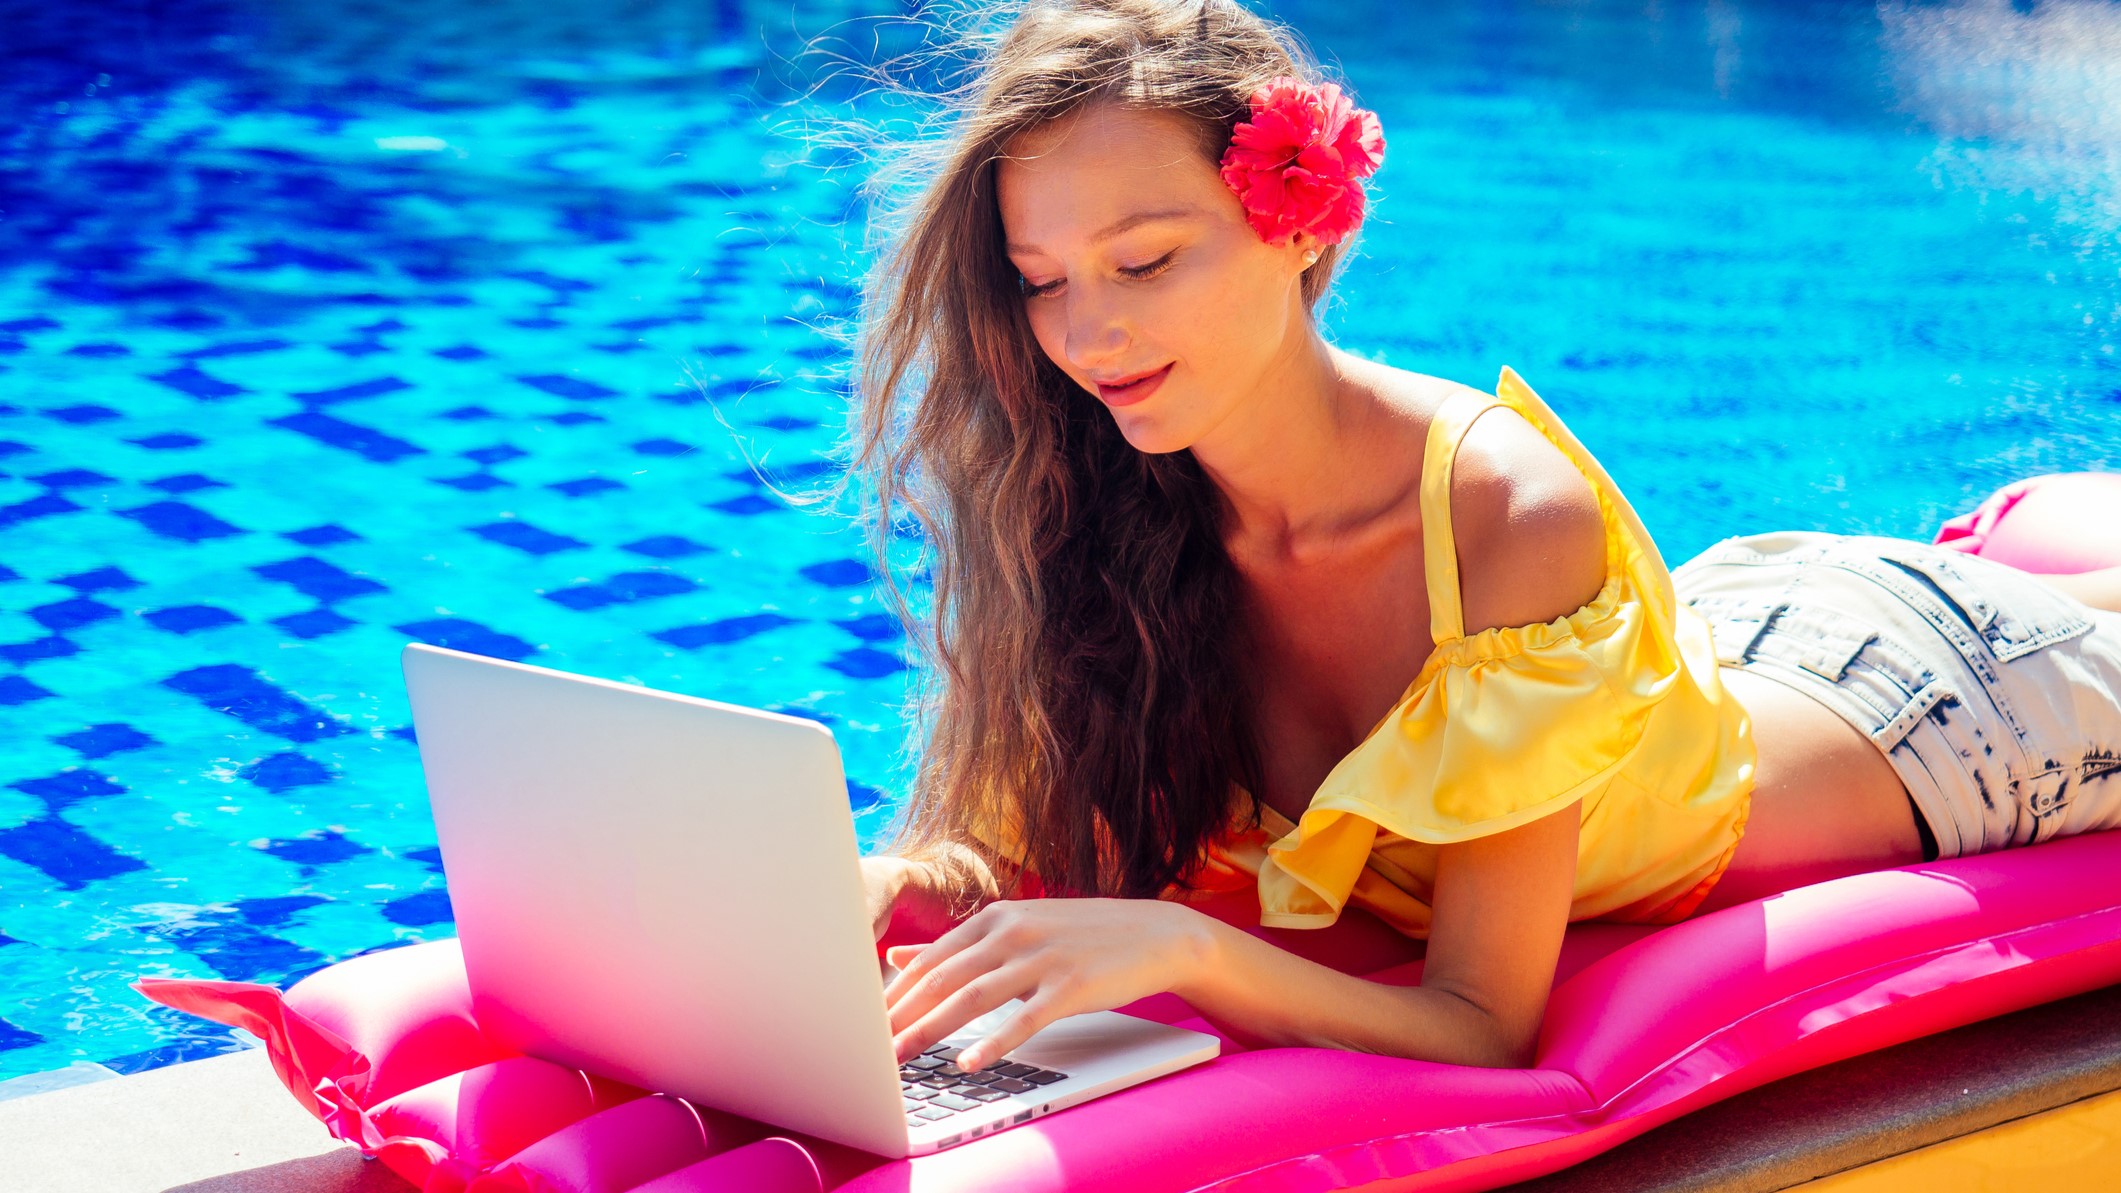 Remote job dream job. Young woman sitting by a pool  in the sun working on her computer